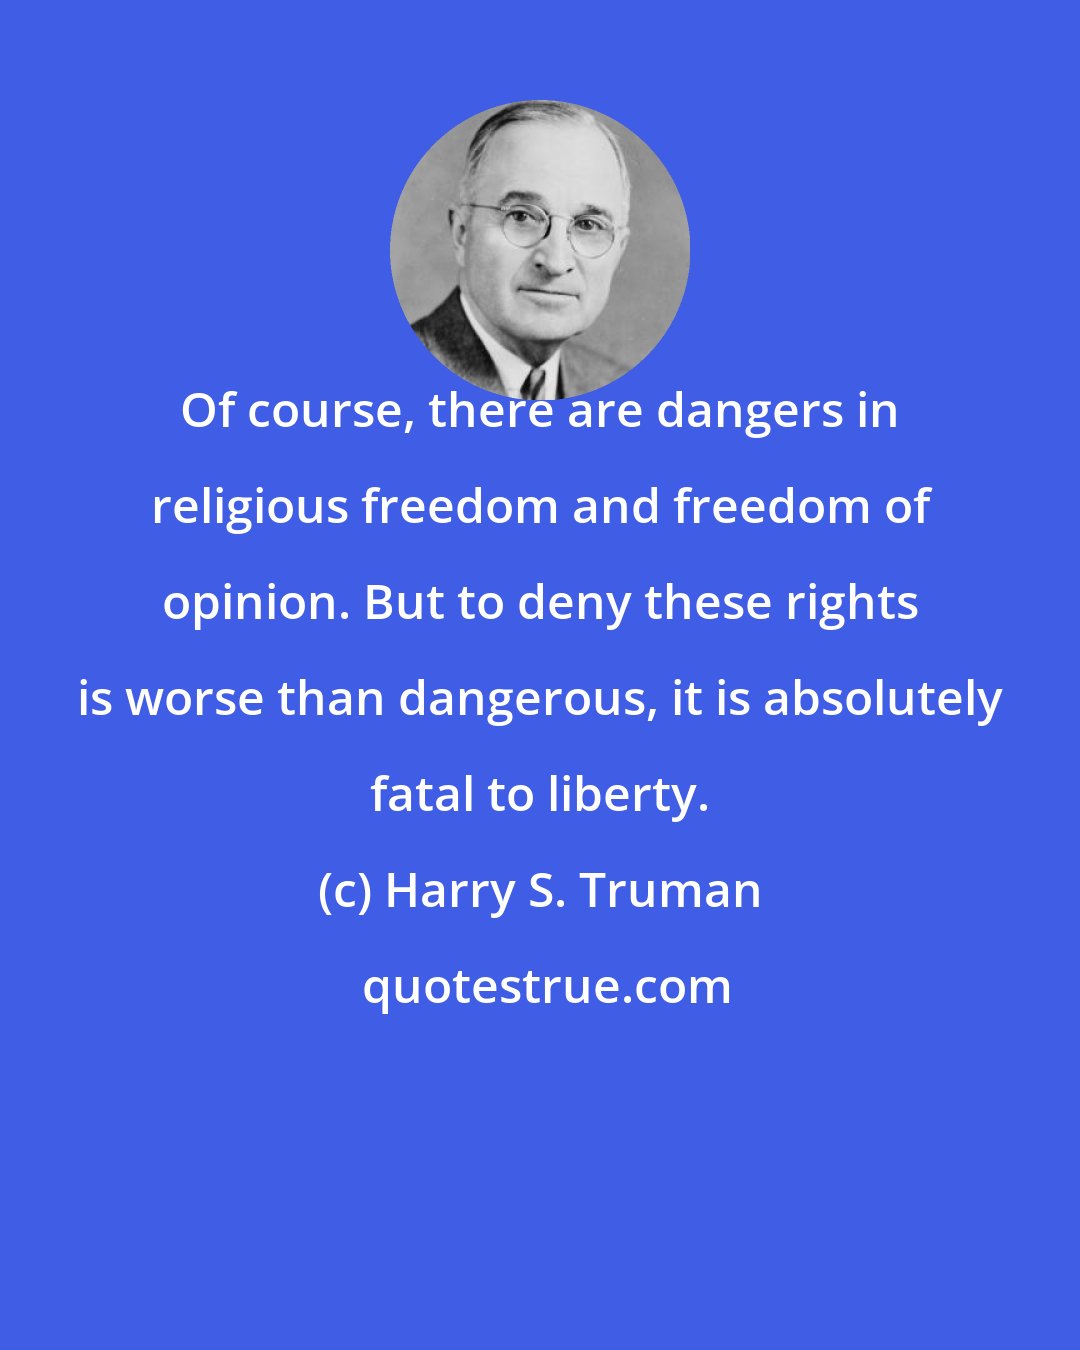 Harry S. Truman: Of course, there are dangers in religious freedom and freedom of opinion. But to deny these rights is worse than dangerous, it is absolutely fatal to liberty.